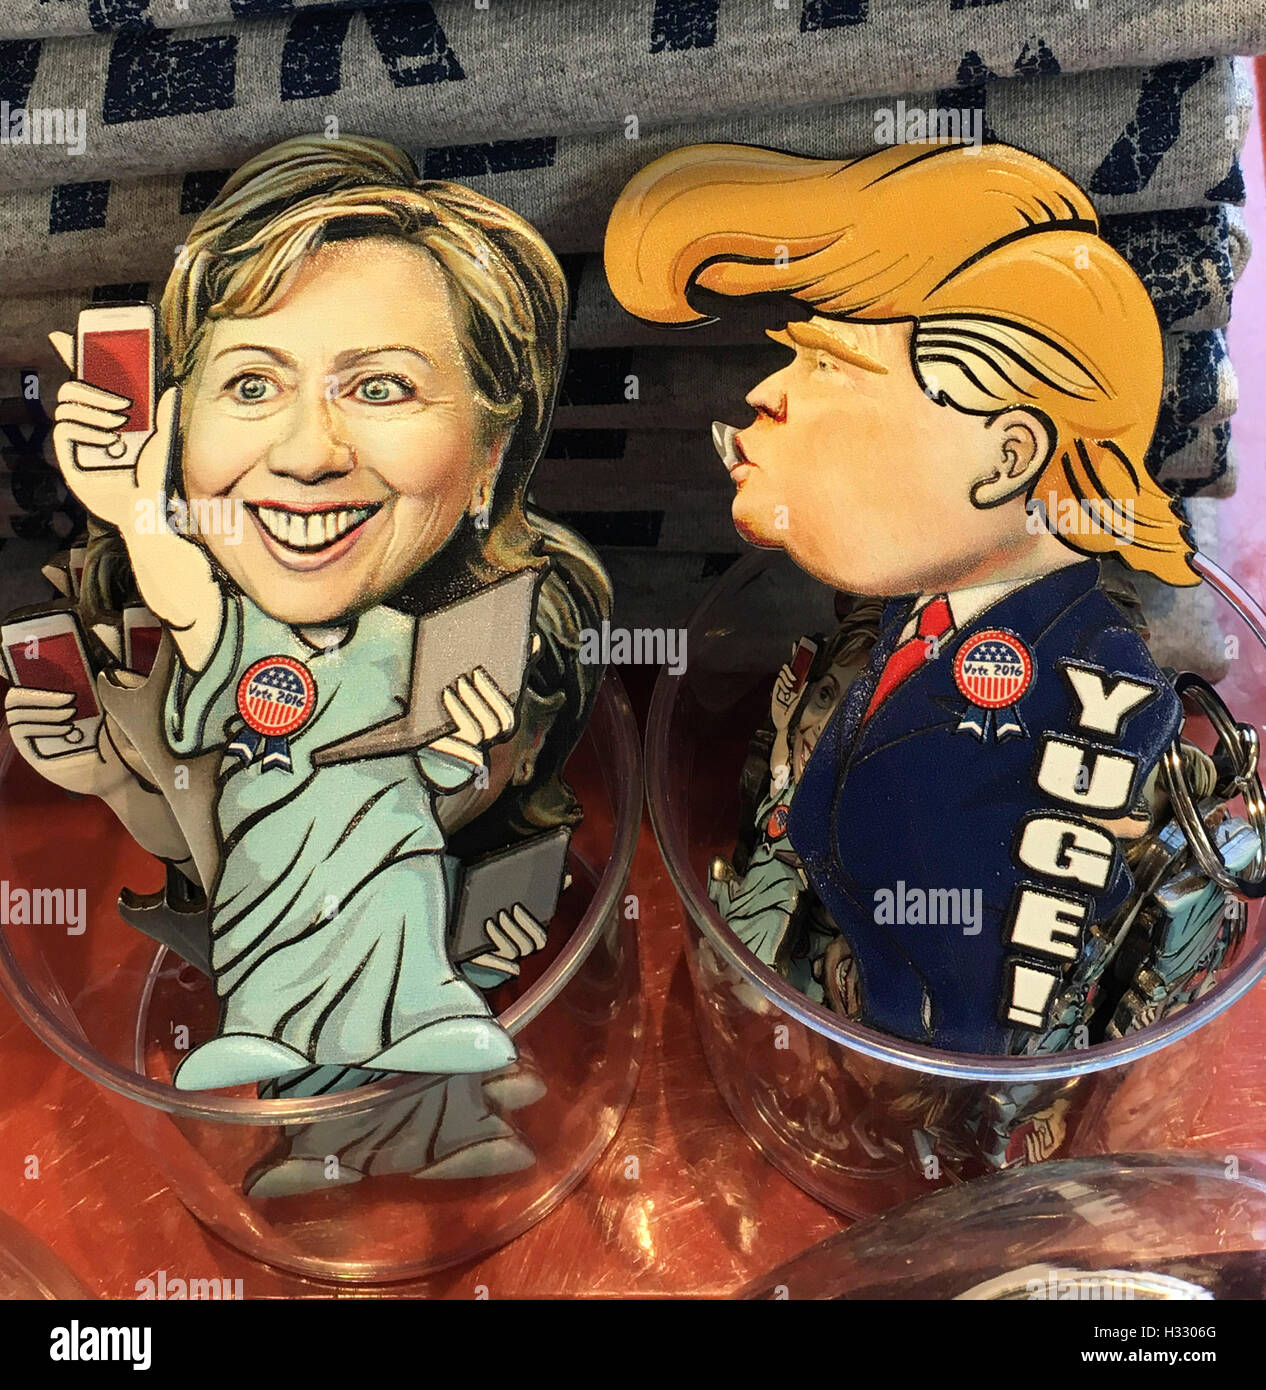 Effigies of Hillary Clinton and Donald Trump on different items during the american presidential campaign, USA Stock Photo